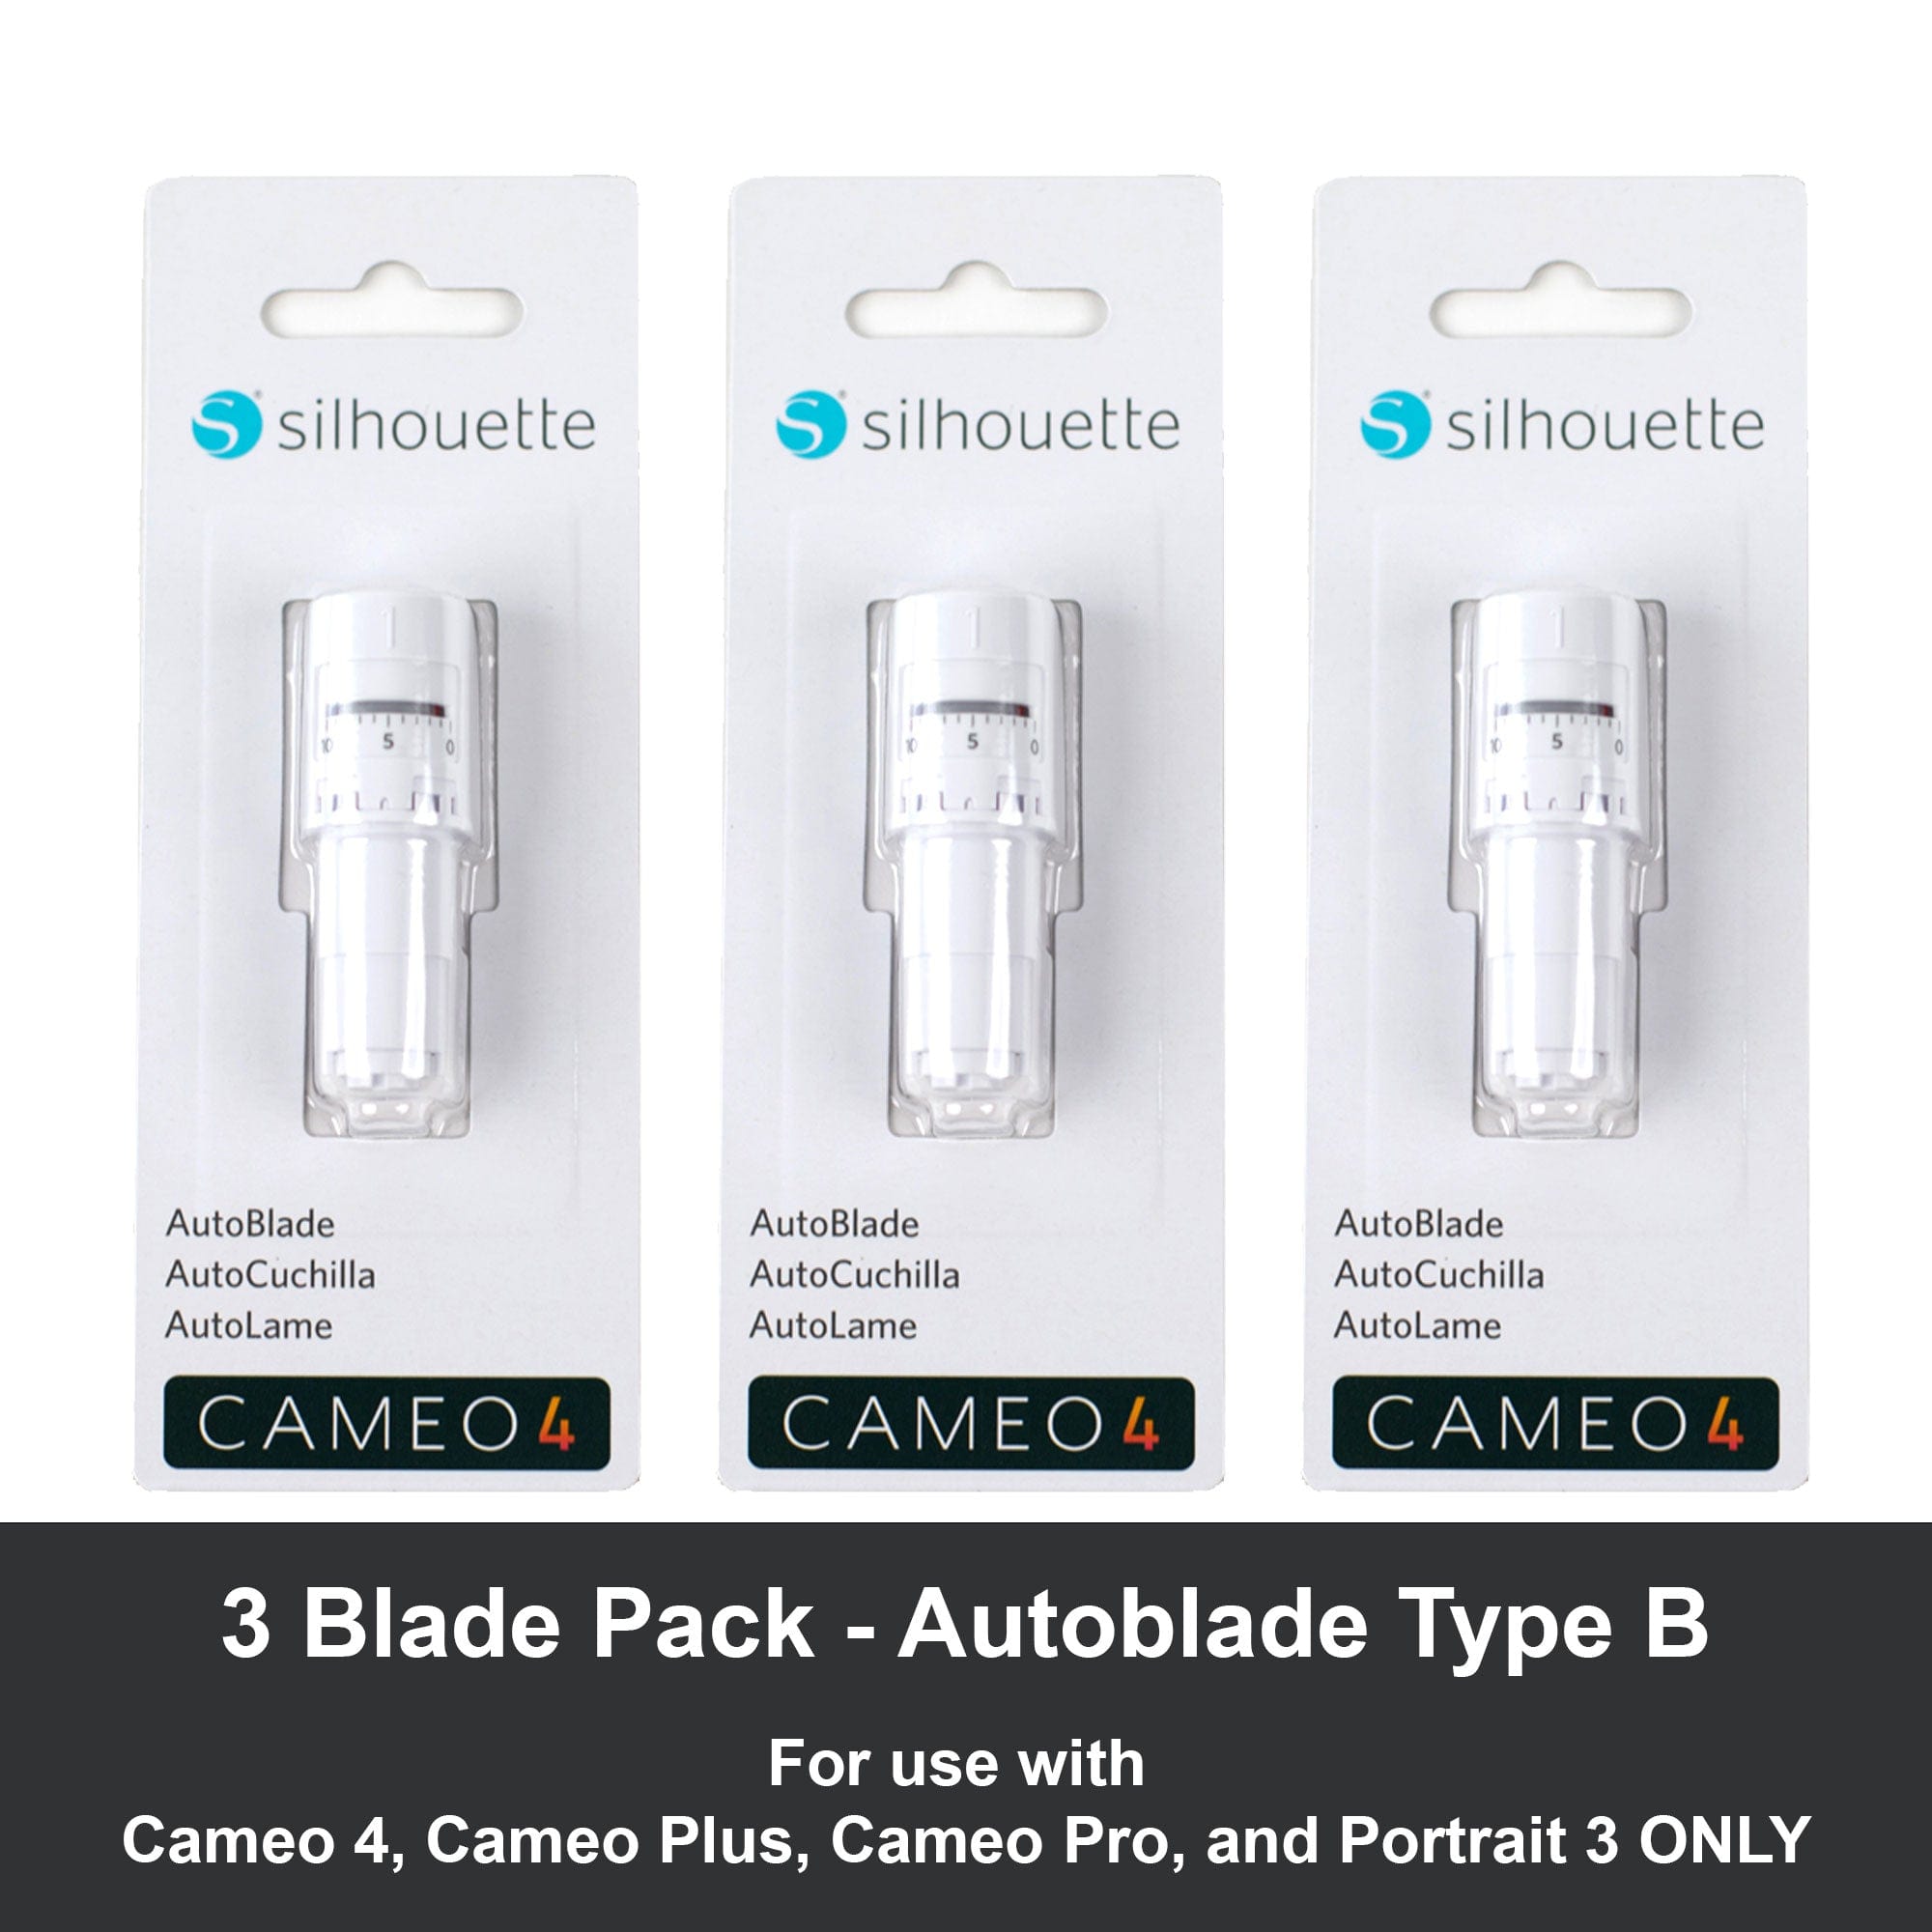 Brand new cameo 4 auto blade not cutting! : r/silhouettecutters